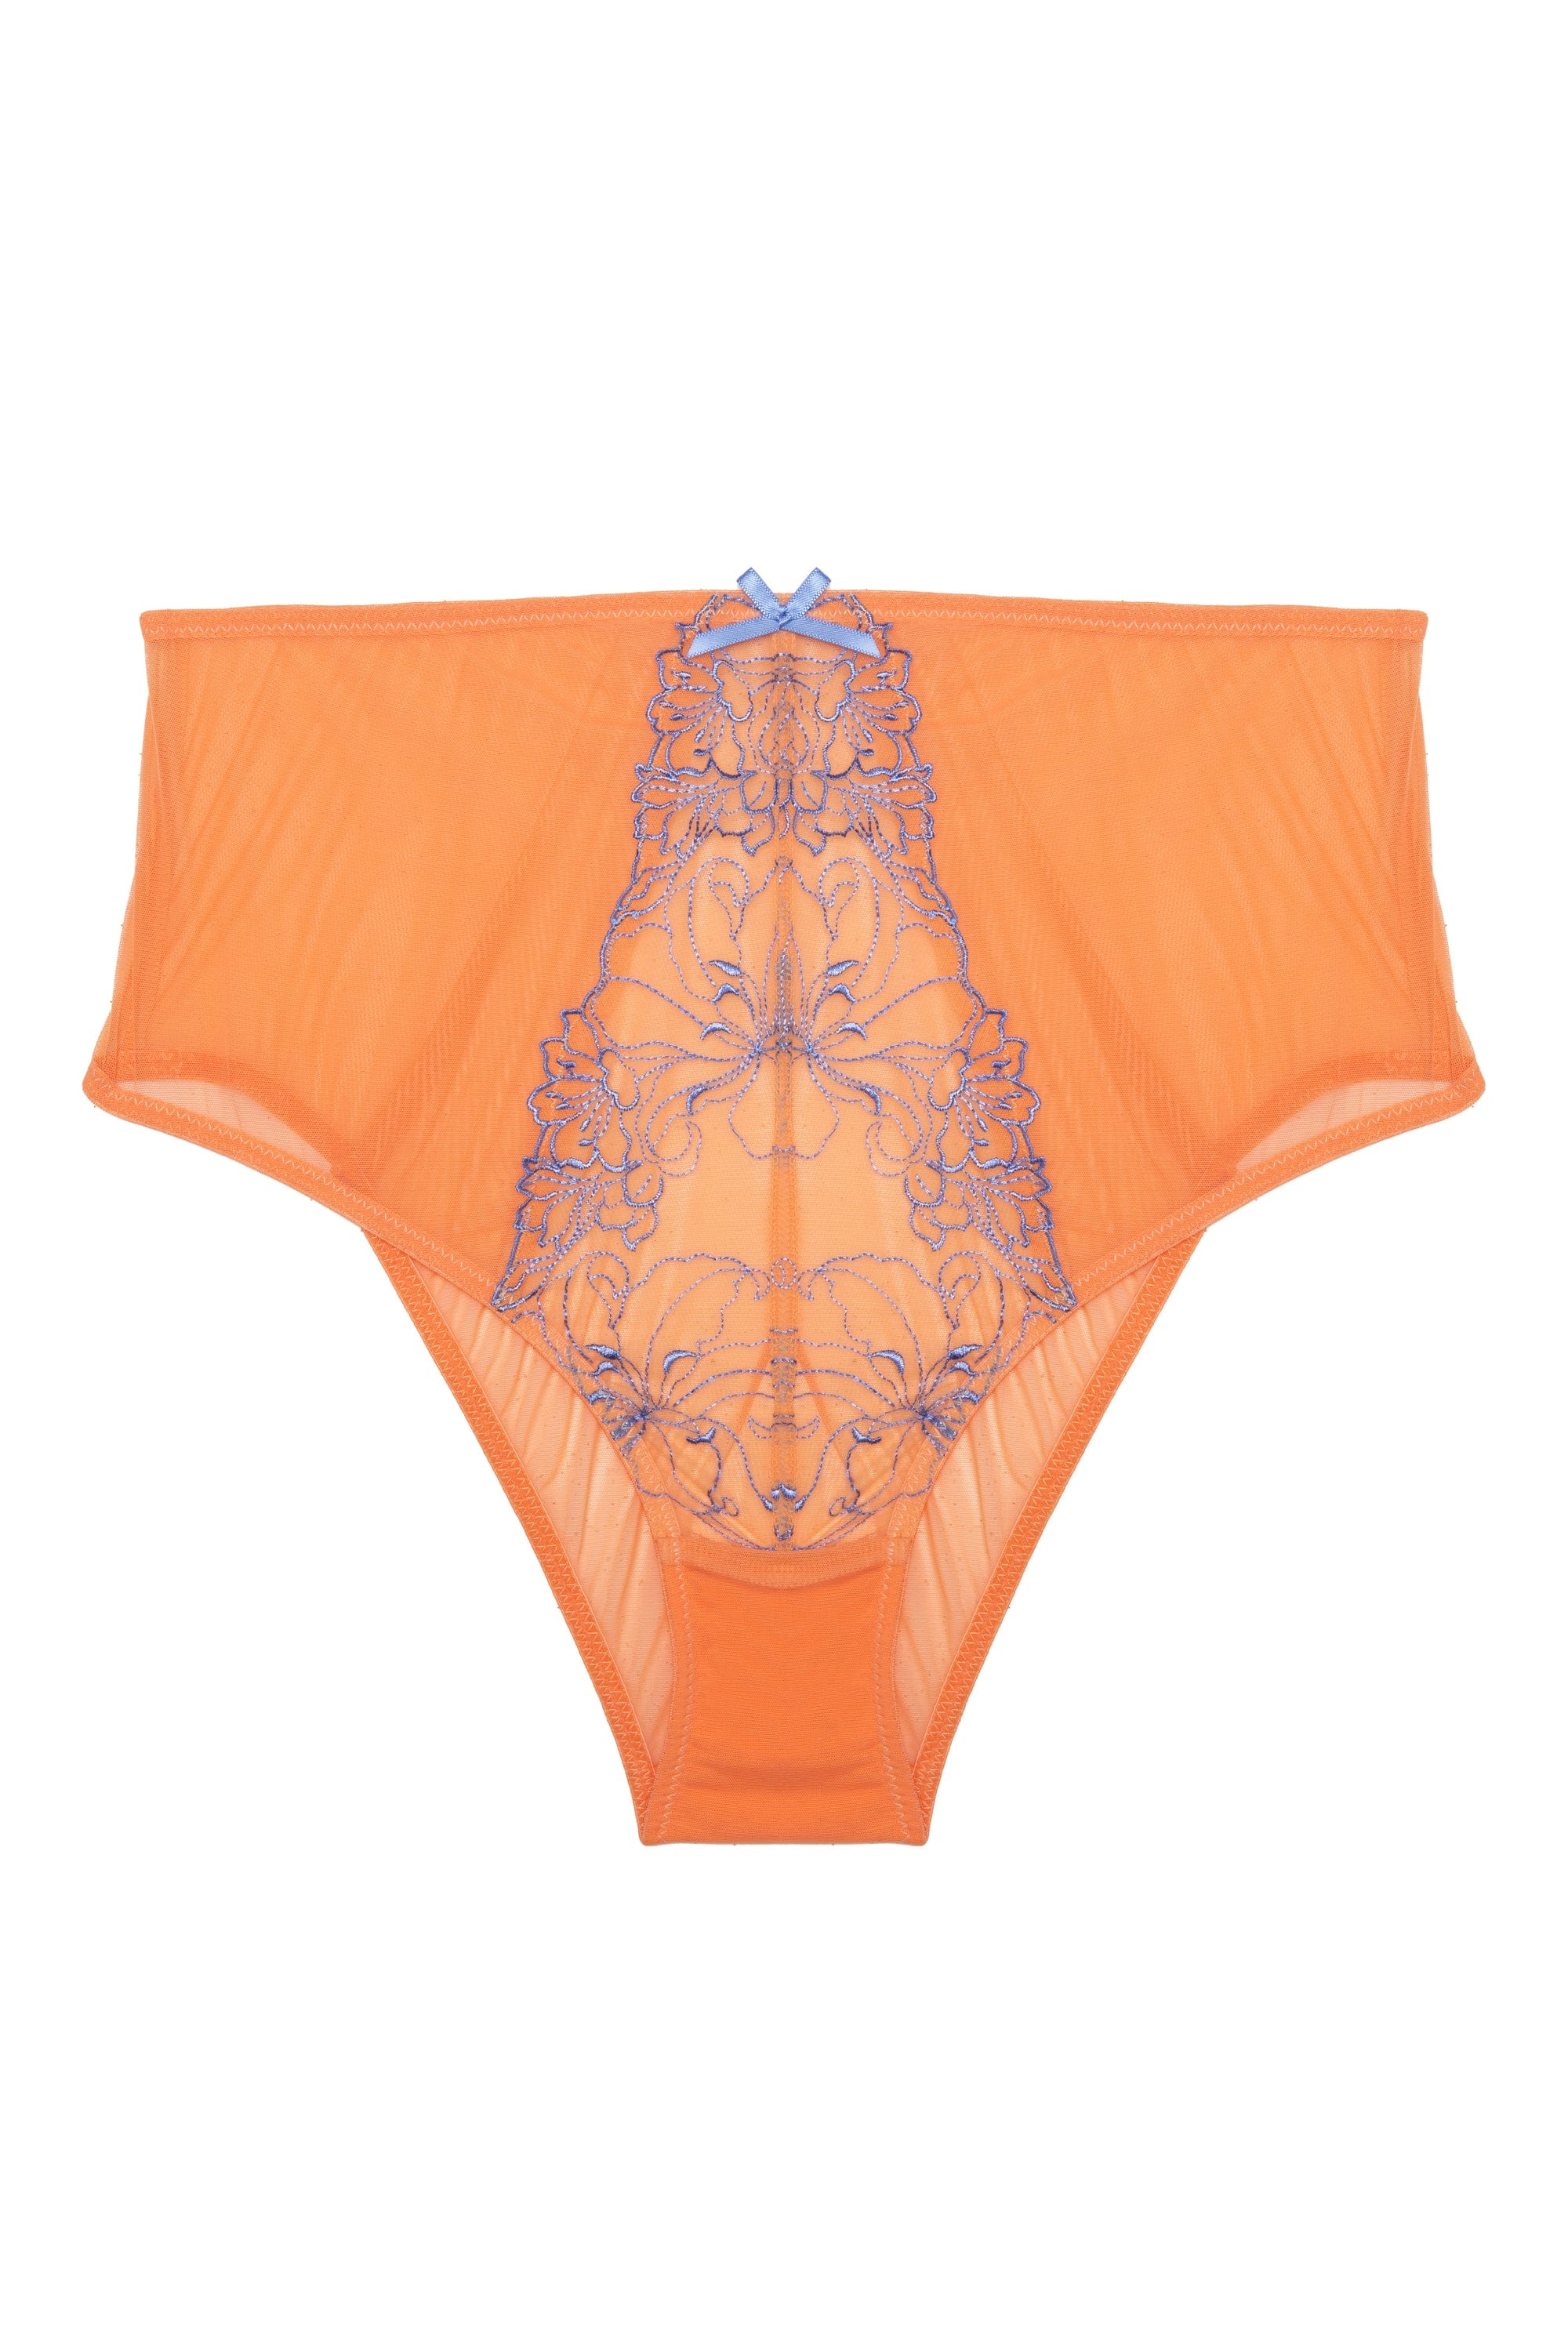 Cutout of orange mesh high-waisted brief with lacey blue-lilac detailing on the front.